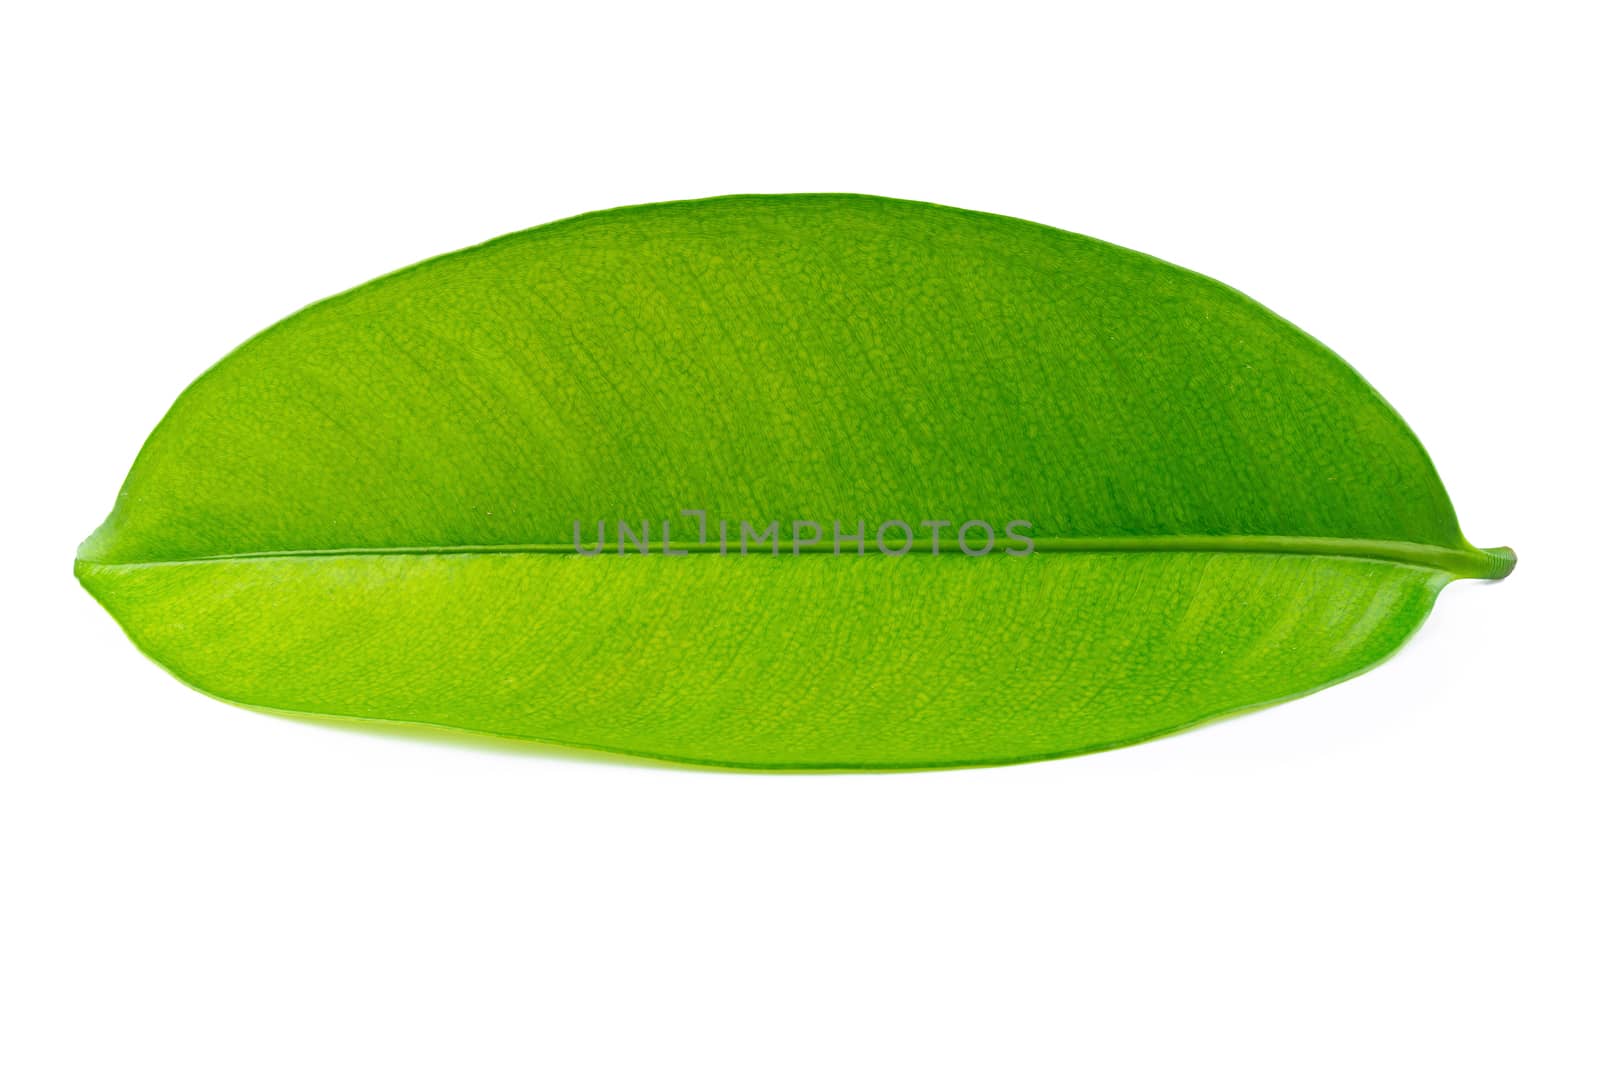 Mangosteen leaves isolated over a white background.